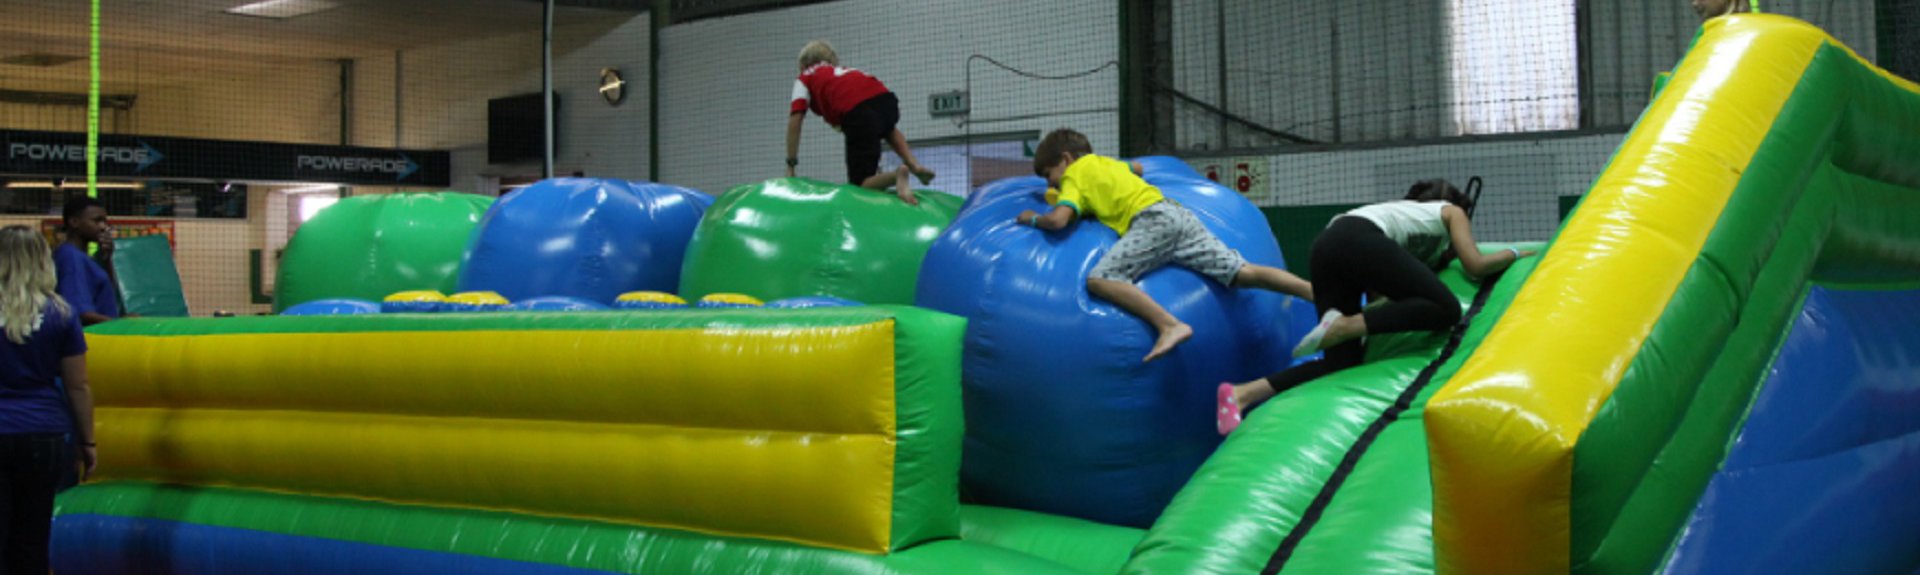 Bounce World Montague Gardens | Cape Town | Indoor Play Venue